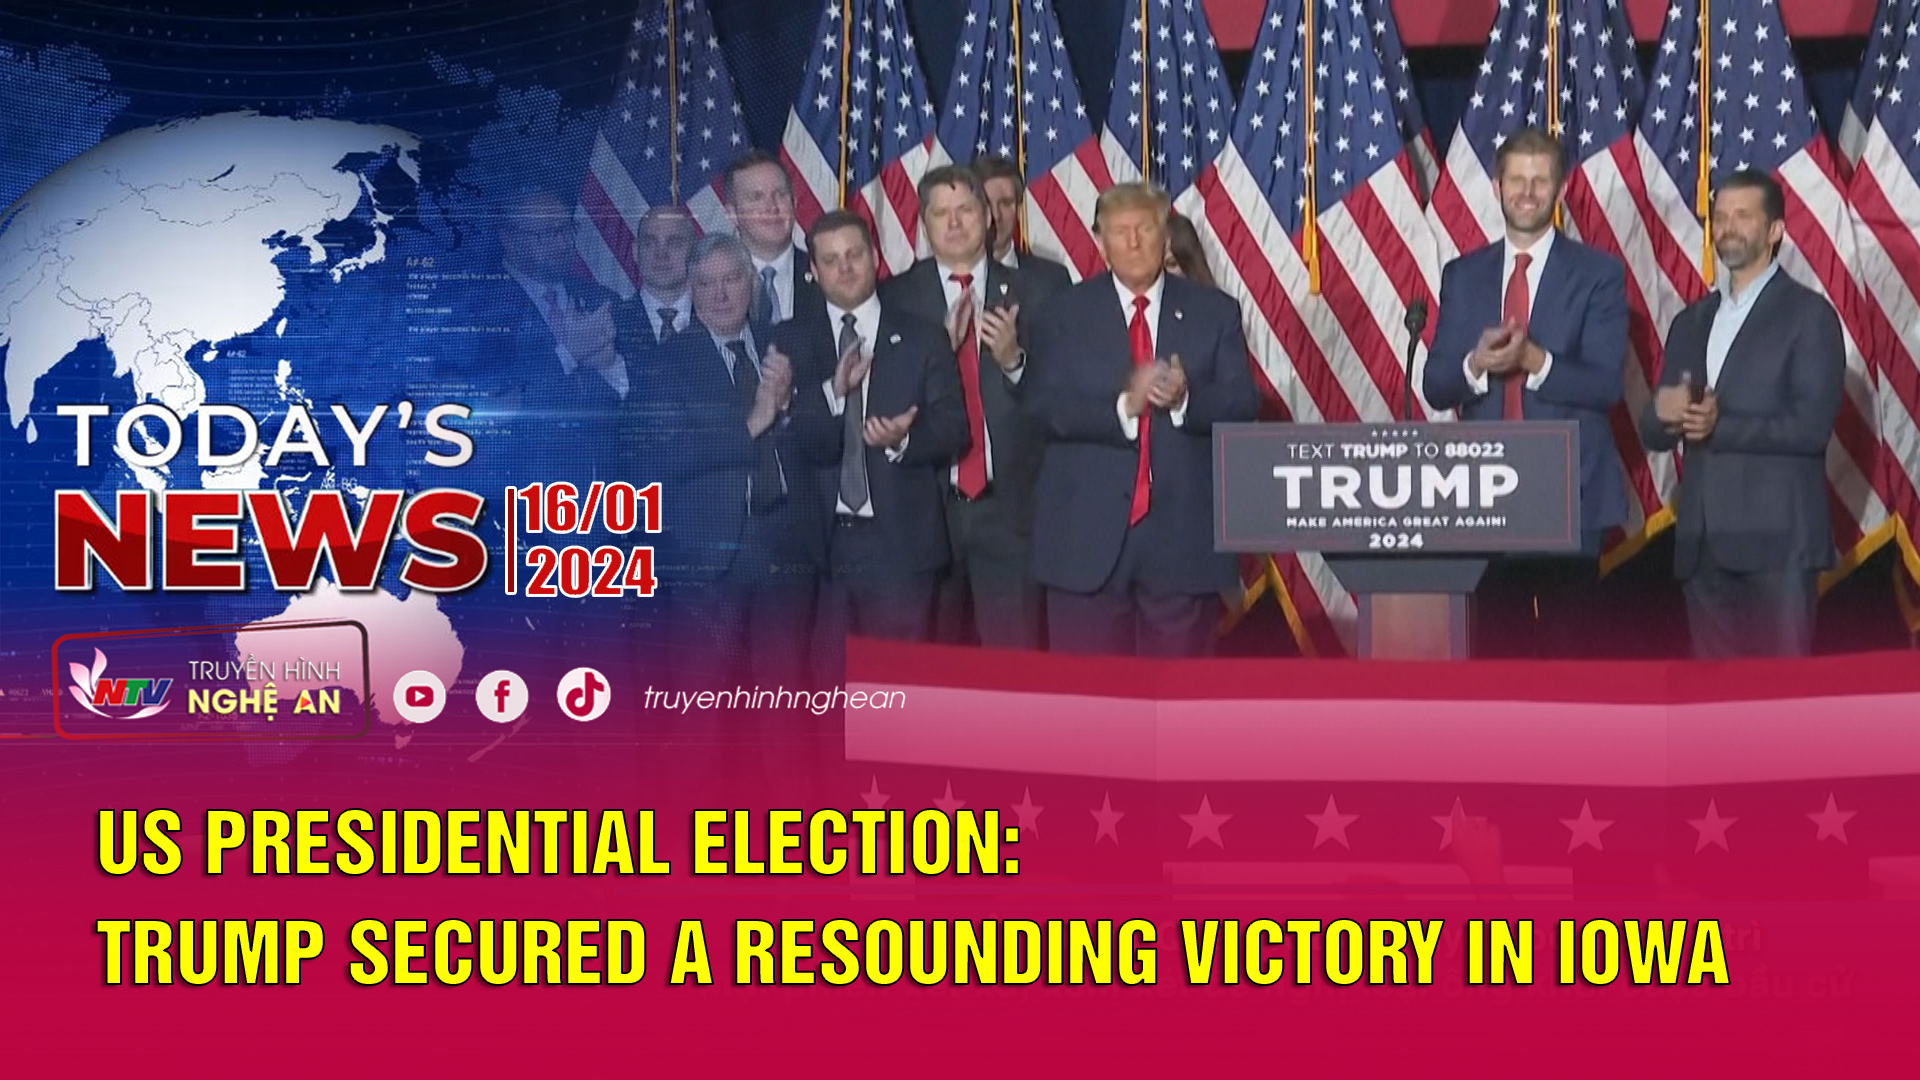 Today's News - 16/01/2024: US presidential election: Trump secured a resounding victory in Iowa